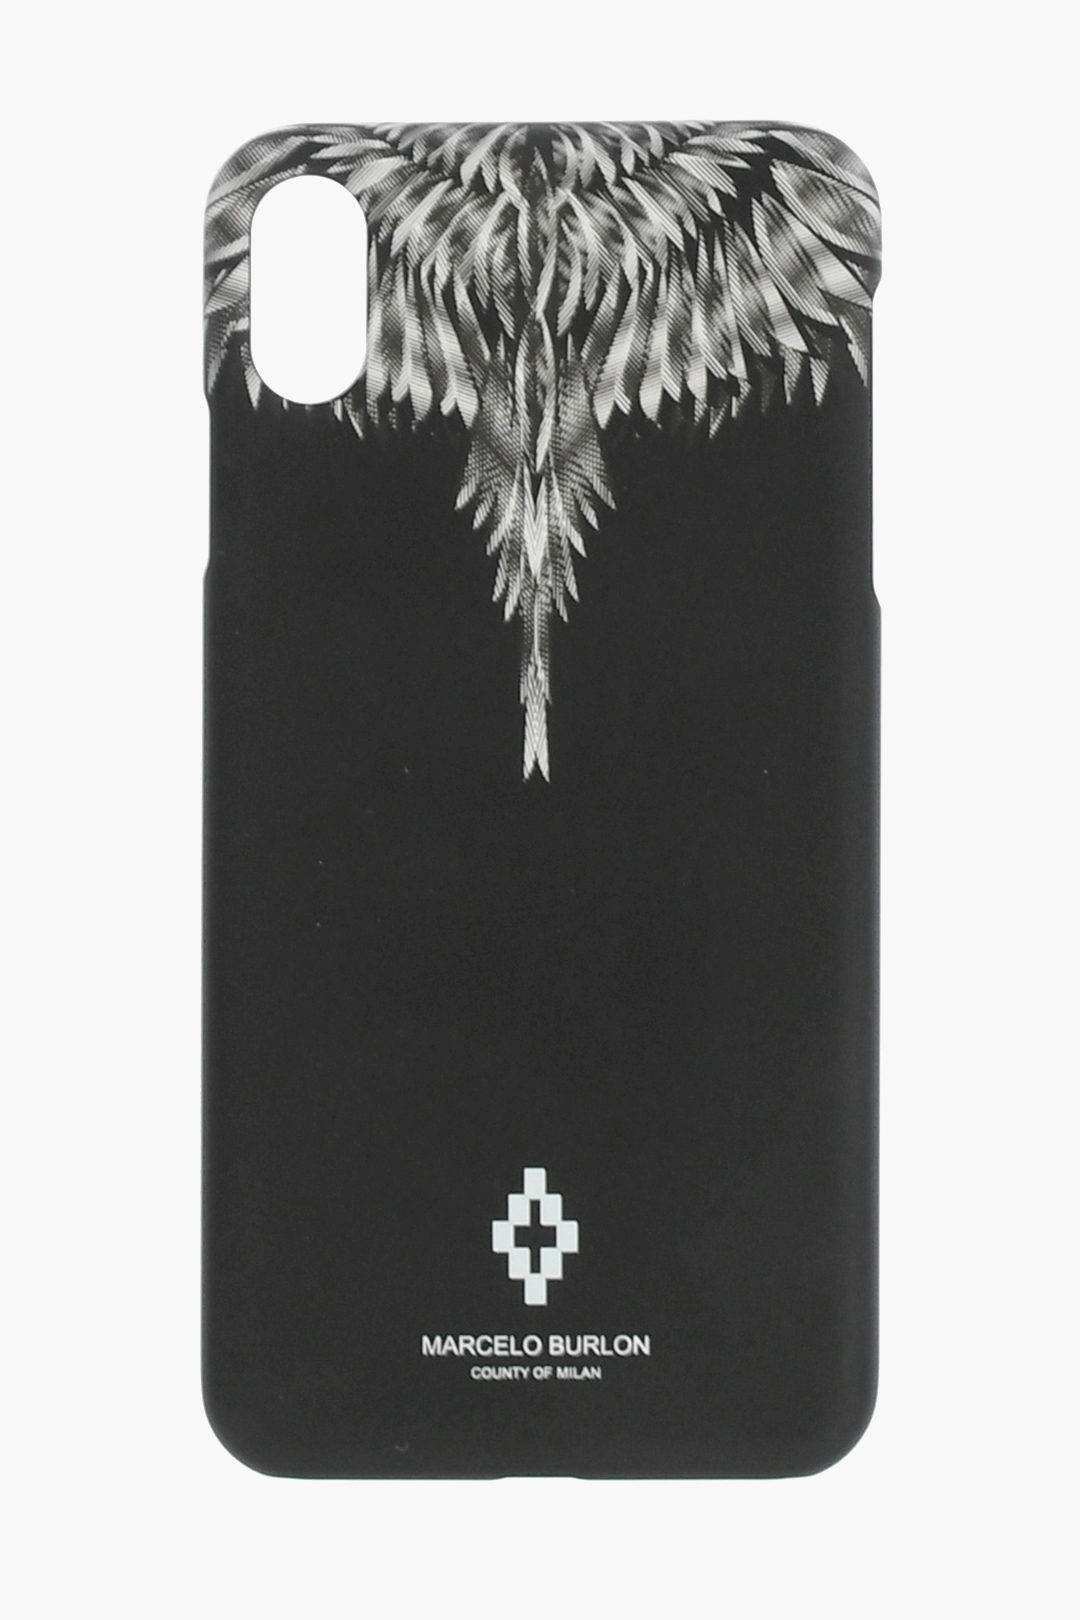 Behandle tolerance afskaffet Marcelo Burlon constrasting printed SHARP WINGS XS MAX Iphone Case men -  Glamood Outlet